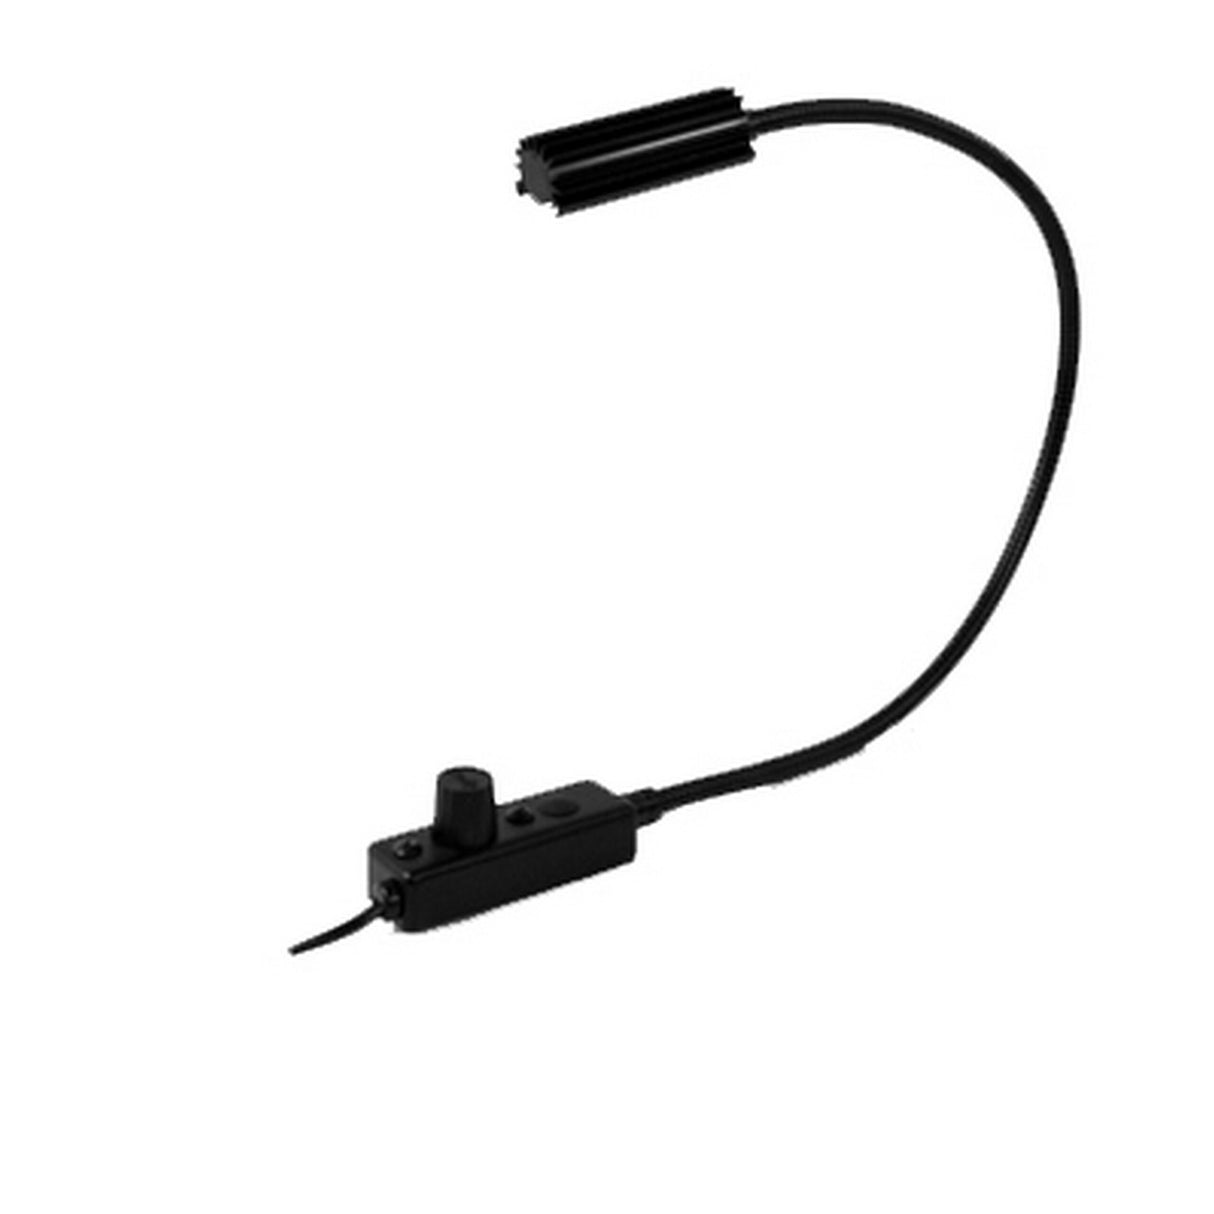 Littlite L-7/6A 6 Inch High Intensity Gooseneck Lampset with Permanent End-Mount, No Power Supply